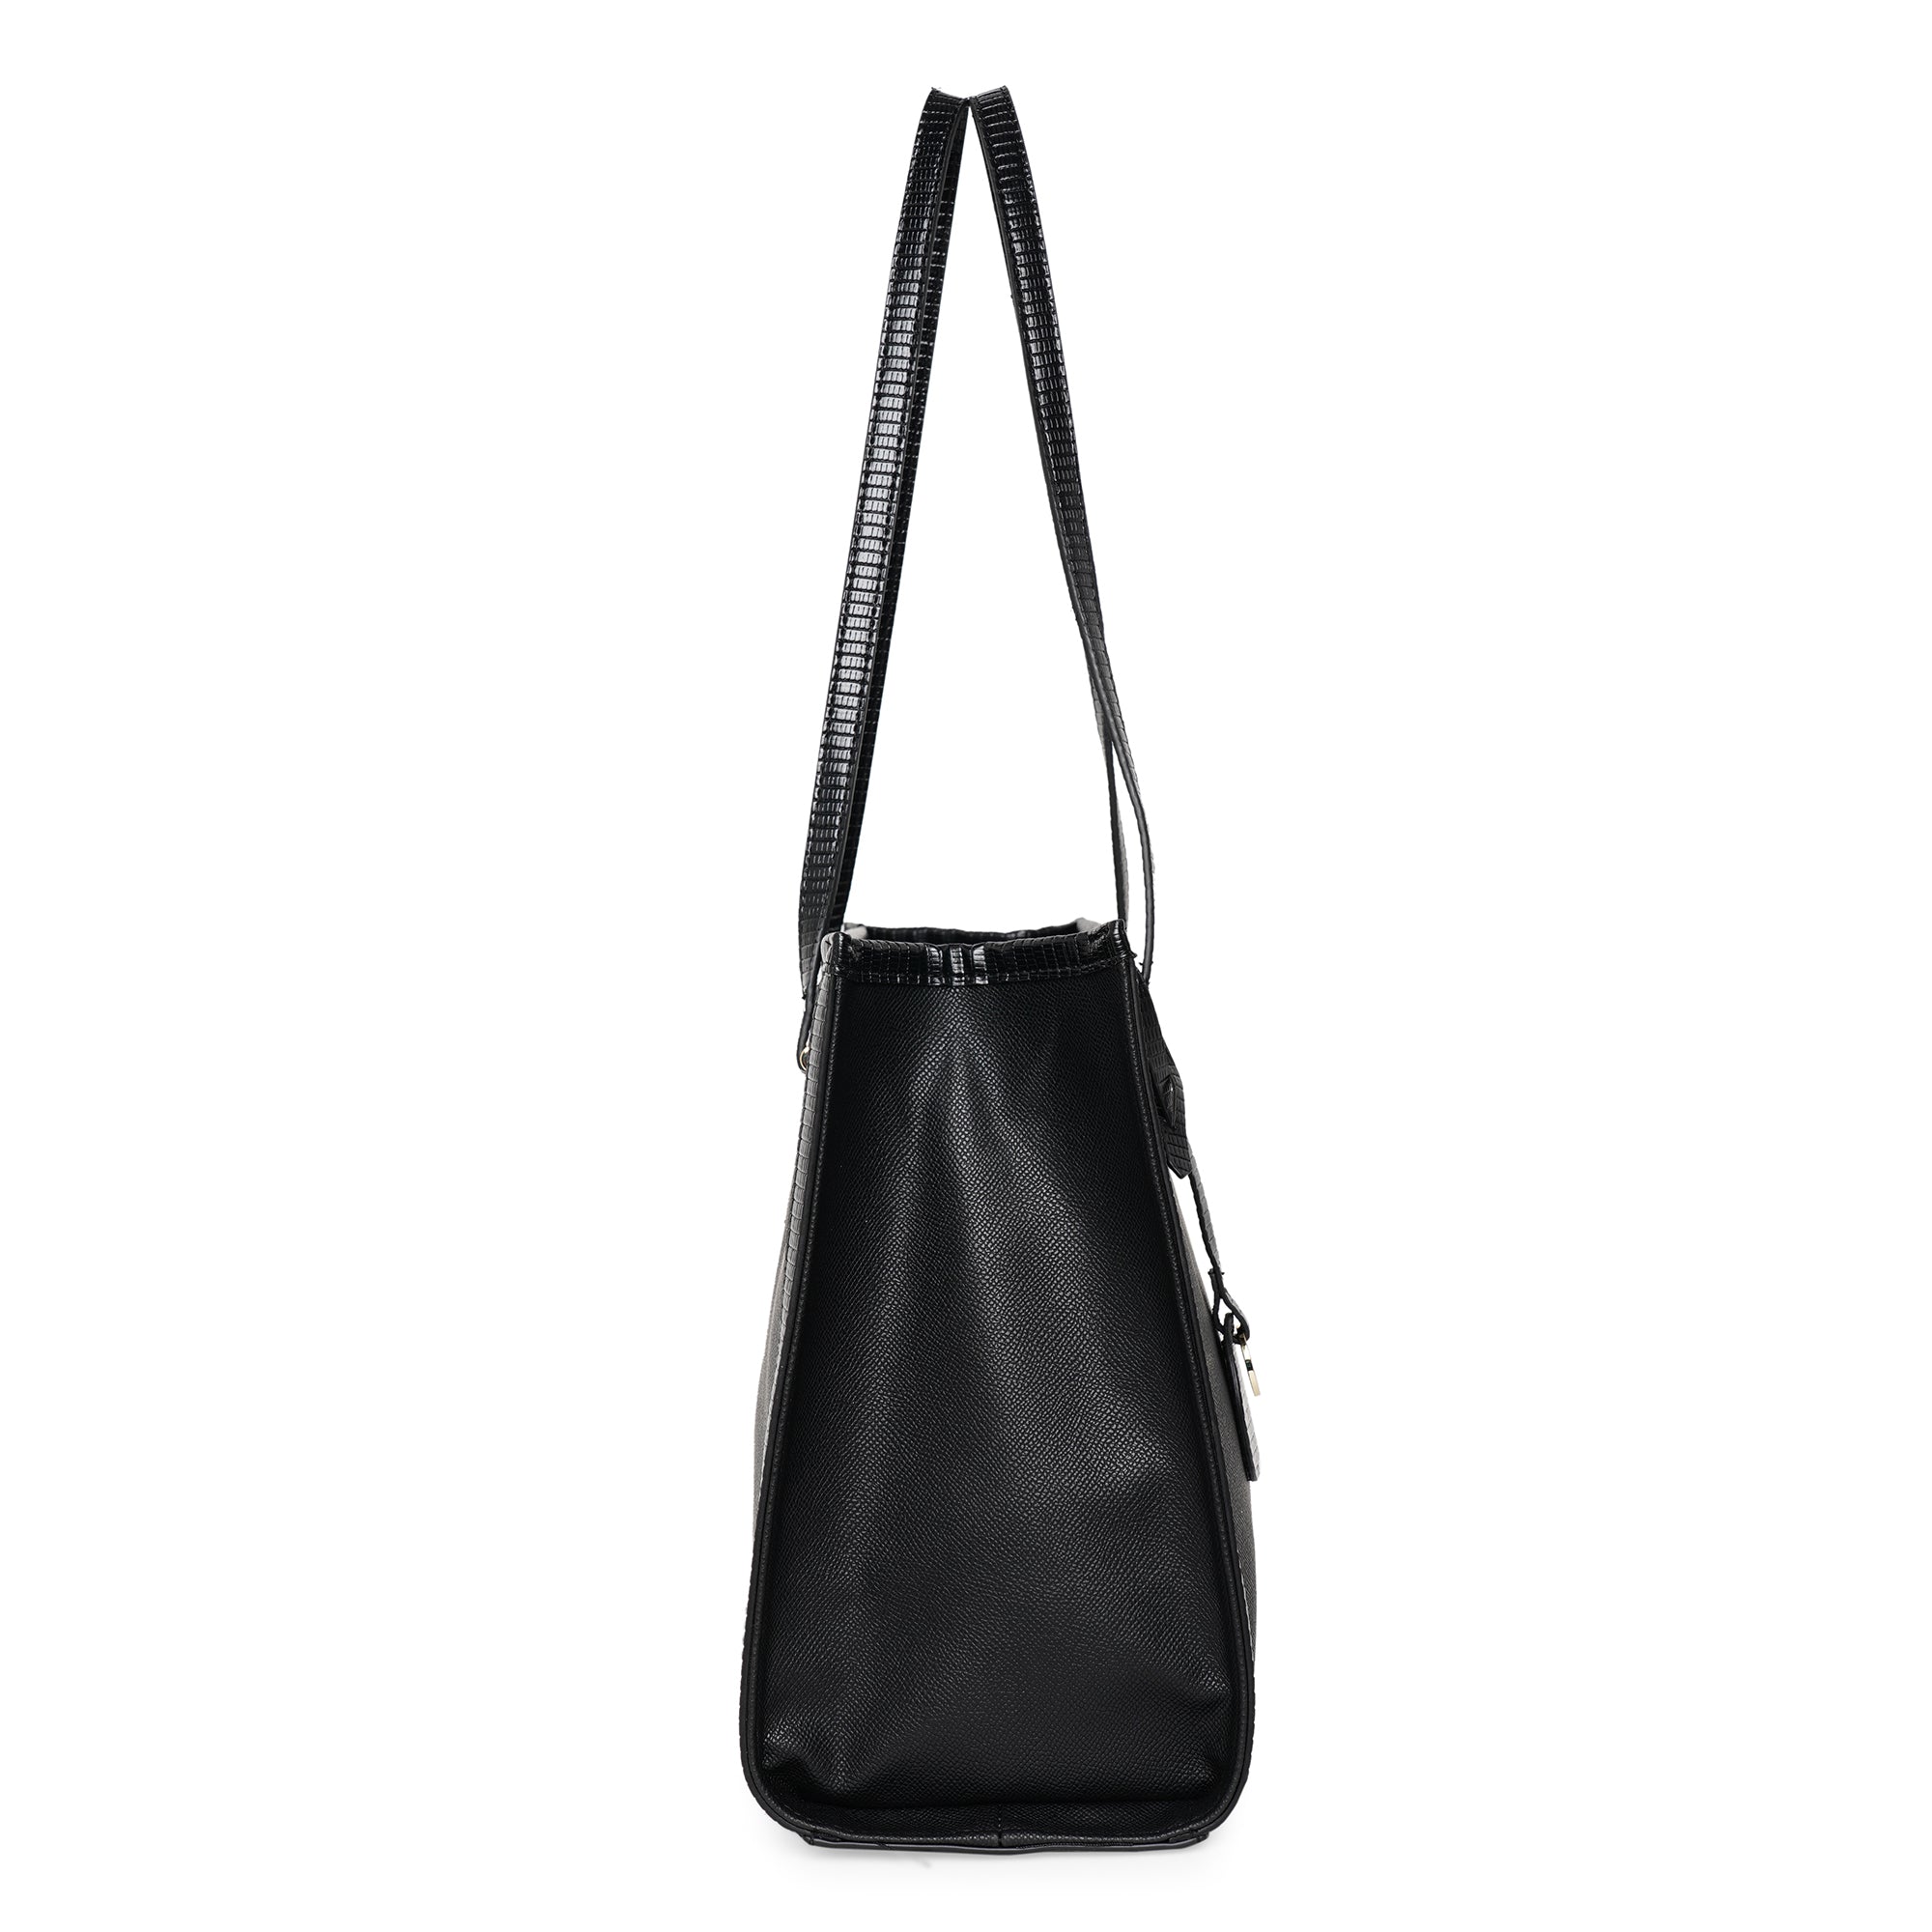 All Day Tote Bag  Black Leather  Brandless